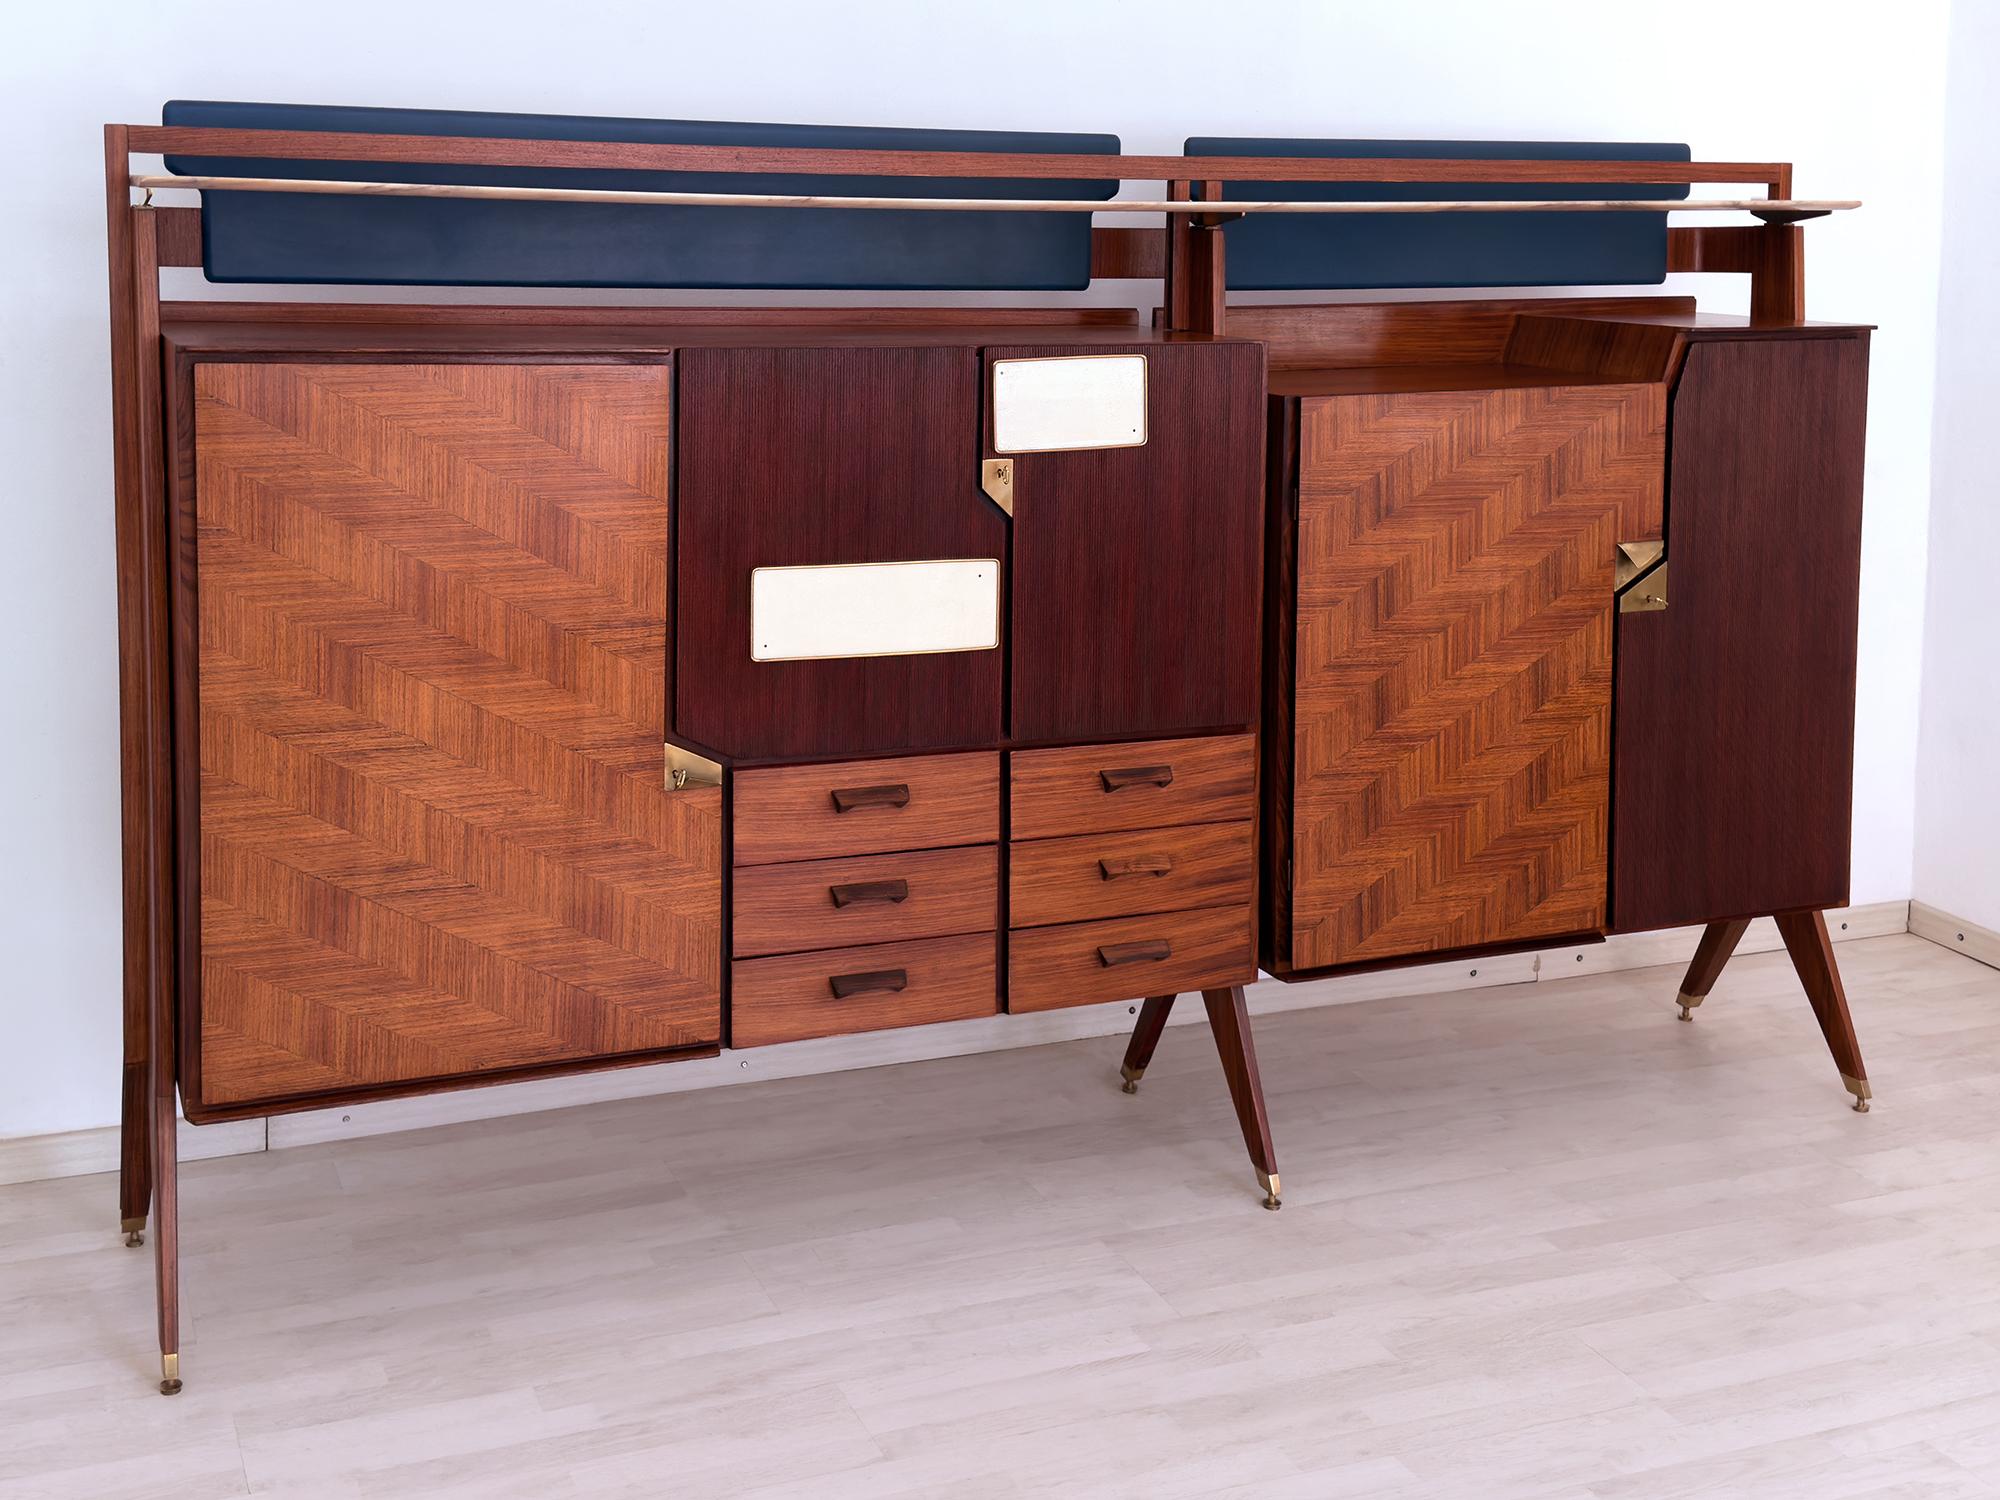 Italian Midcentury Sideboard or Bar Cabinet by La Permanente Mobili Cantù, 1950s For Sale 7